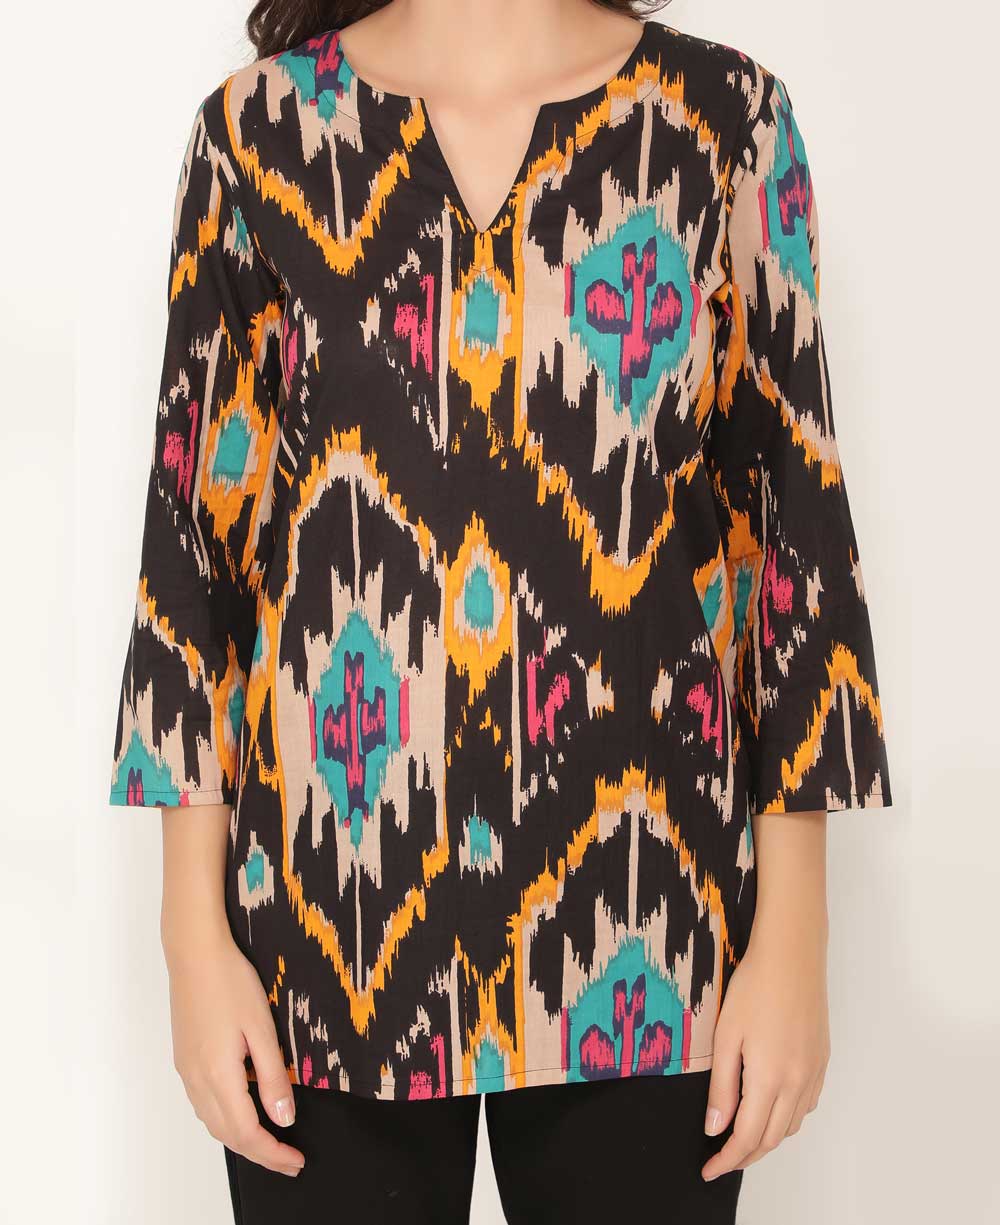 Ikat Inspired Printed Cotton Tunic Top - Apparel S